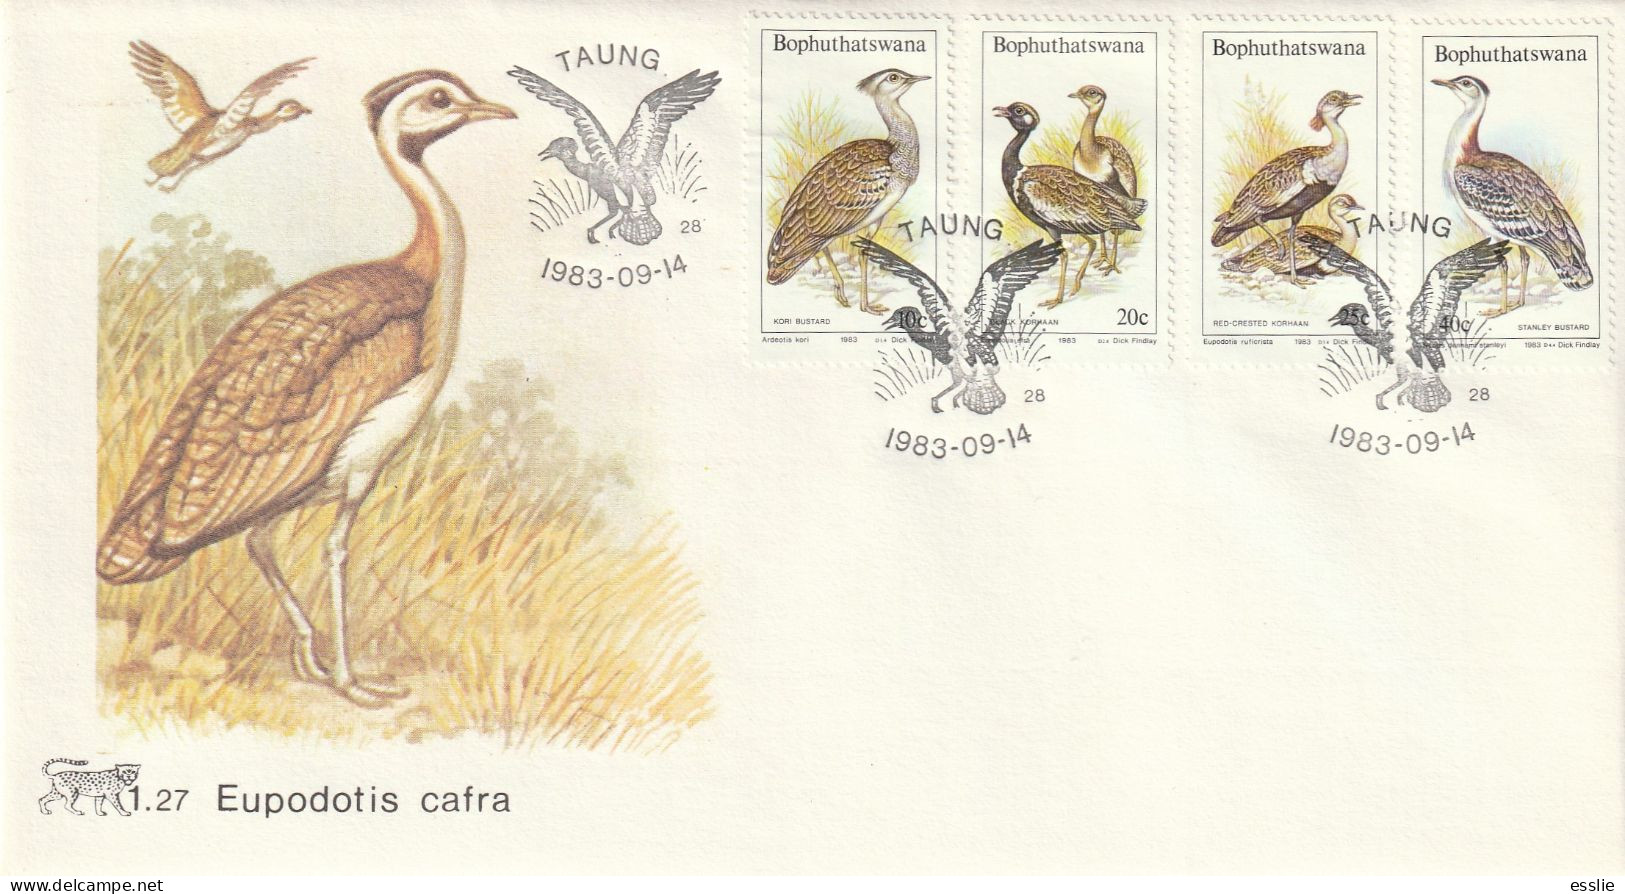 Bophuthatswana - 1983 - Birds Vogel Of The Veld Bustards - First Day Cover - Small - Aves Gruiformes (Grullas)